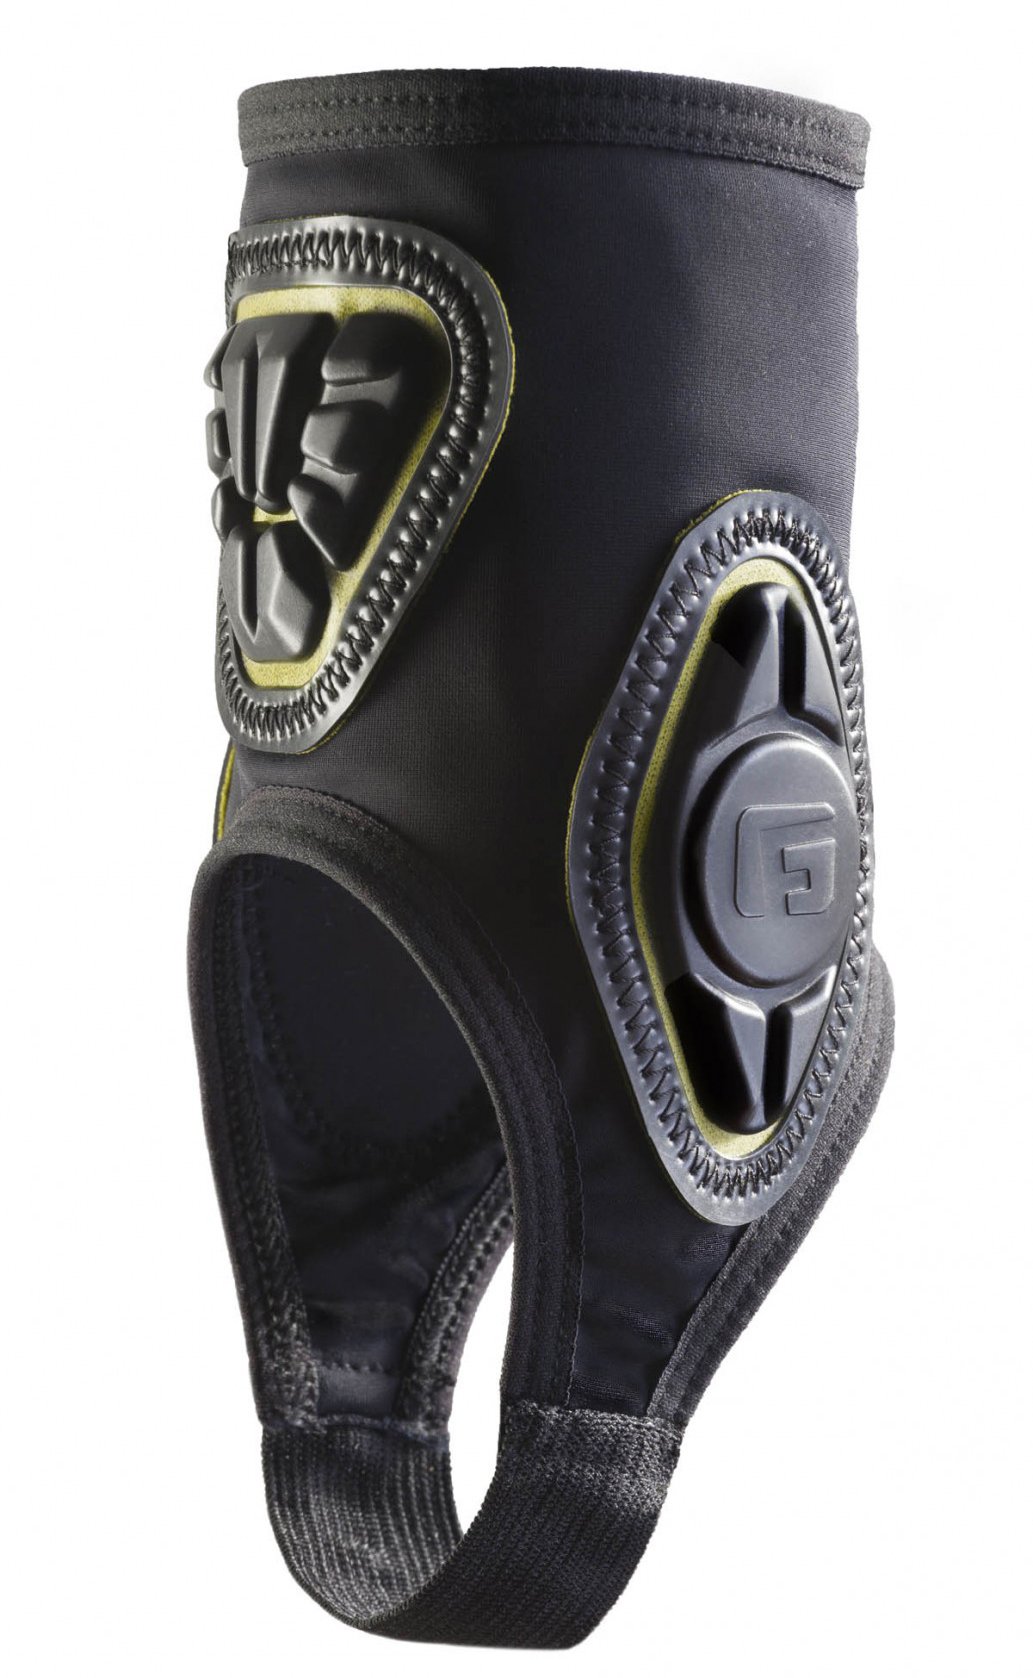 G-Form Pro Ankle Guards